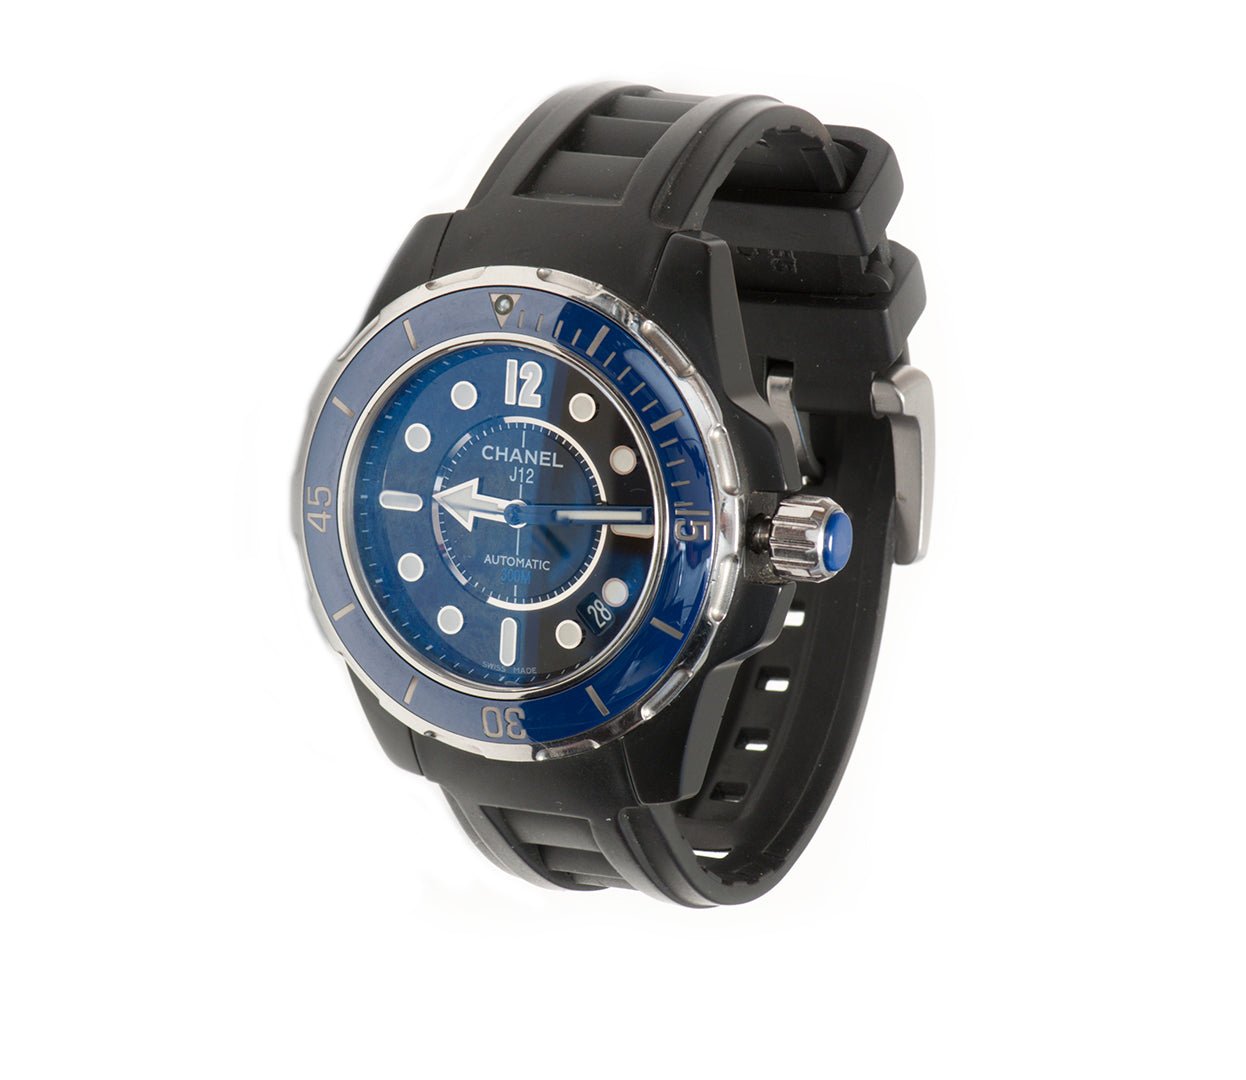 Chanel J12 Marine Automatic Men's Watch - DSF Antique Jewelry